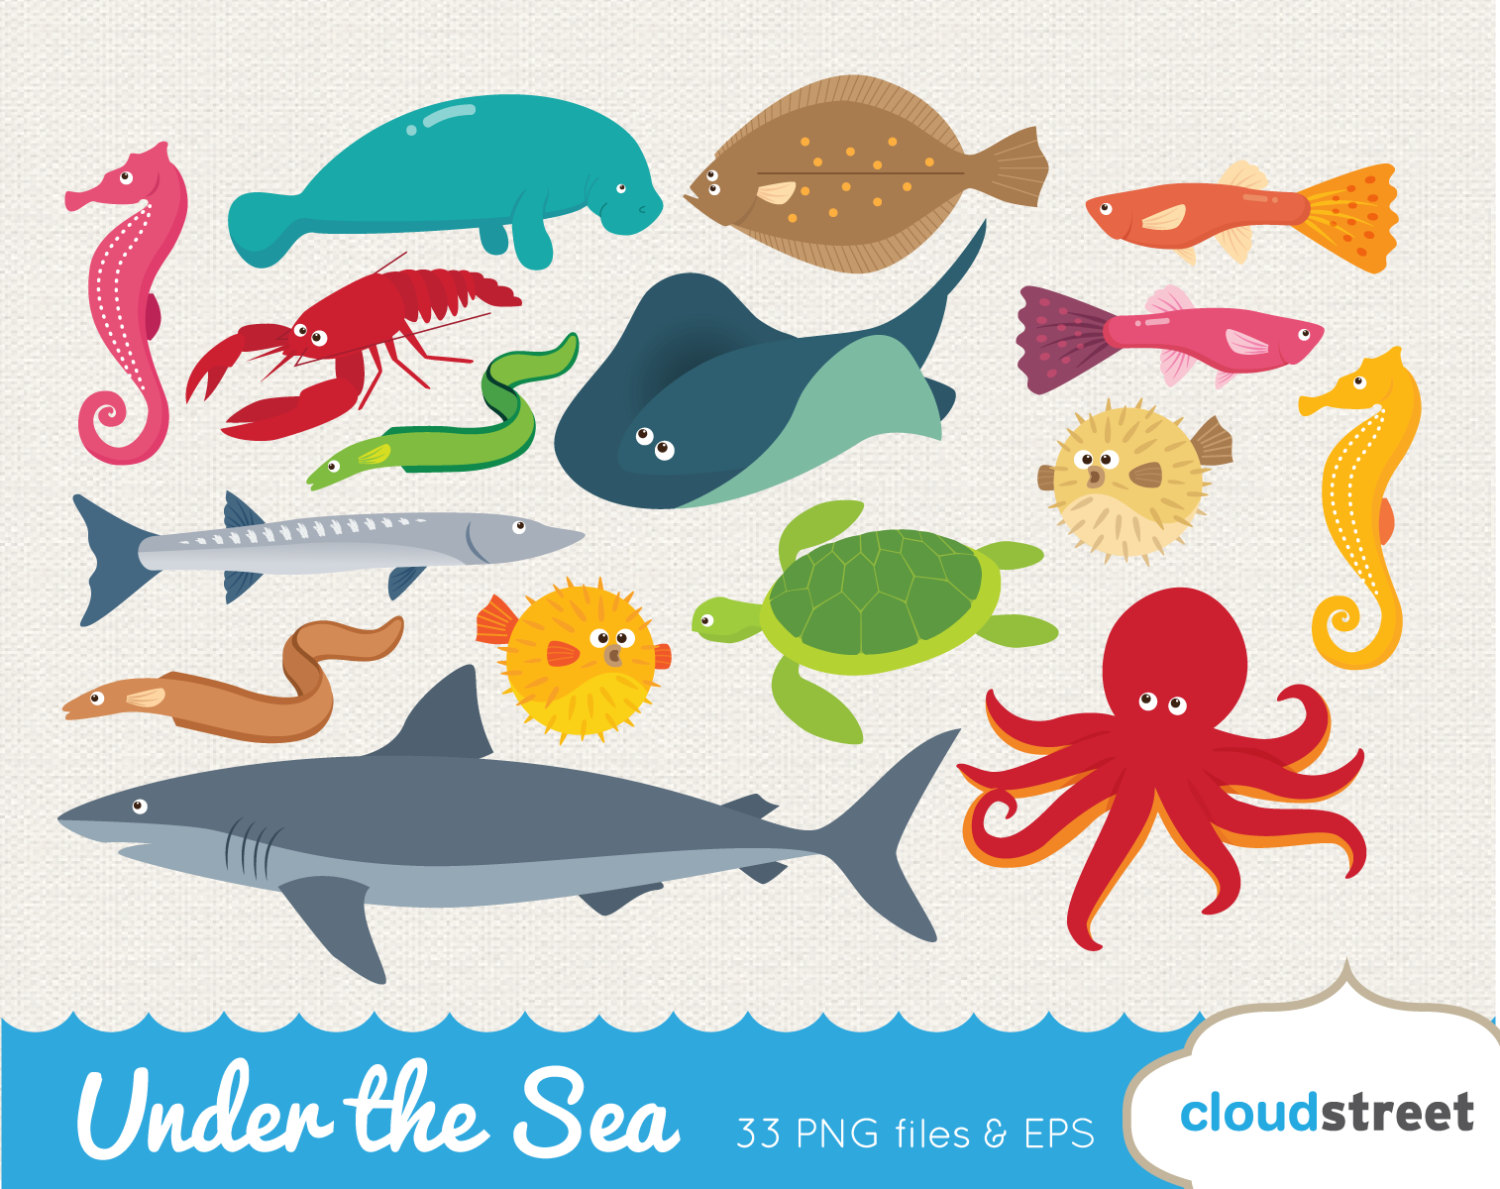 buy 2 get 1 free vector under the sea clip art / sea creatures clipart puffer fish shark octopus manatee turtle stingray / commercial use ok